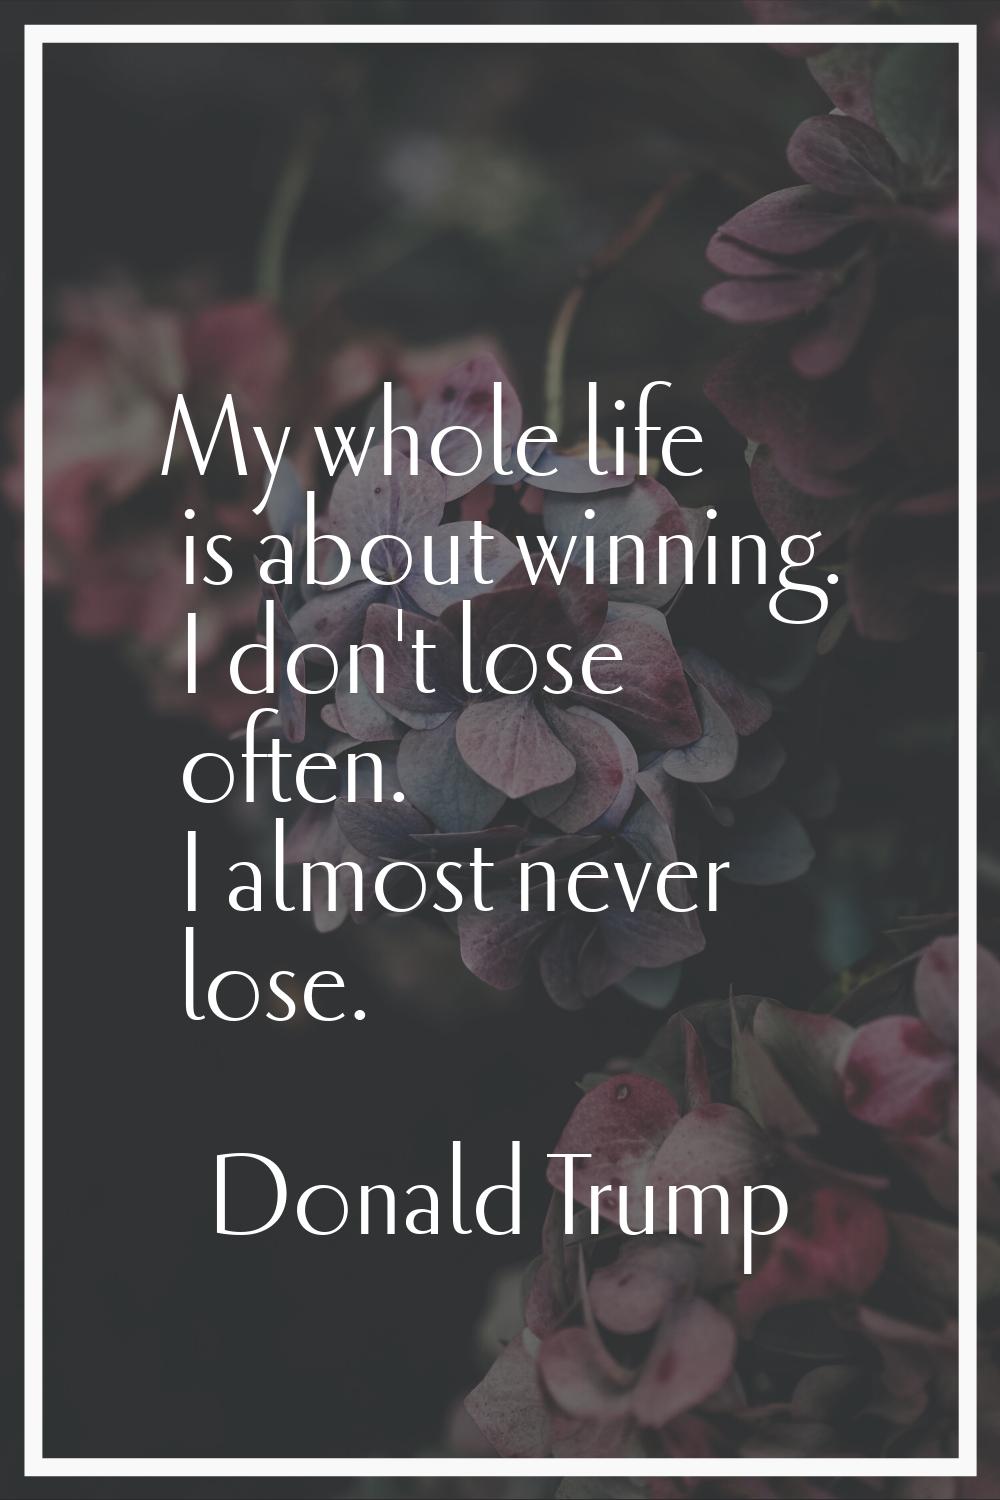 My whole life is about winning. I don't lose often. I almost never lose.